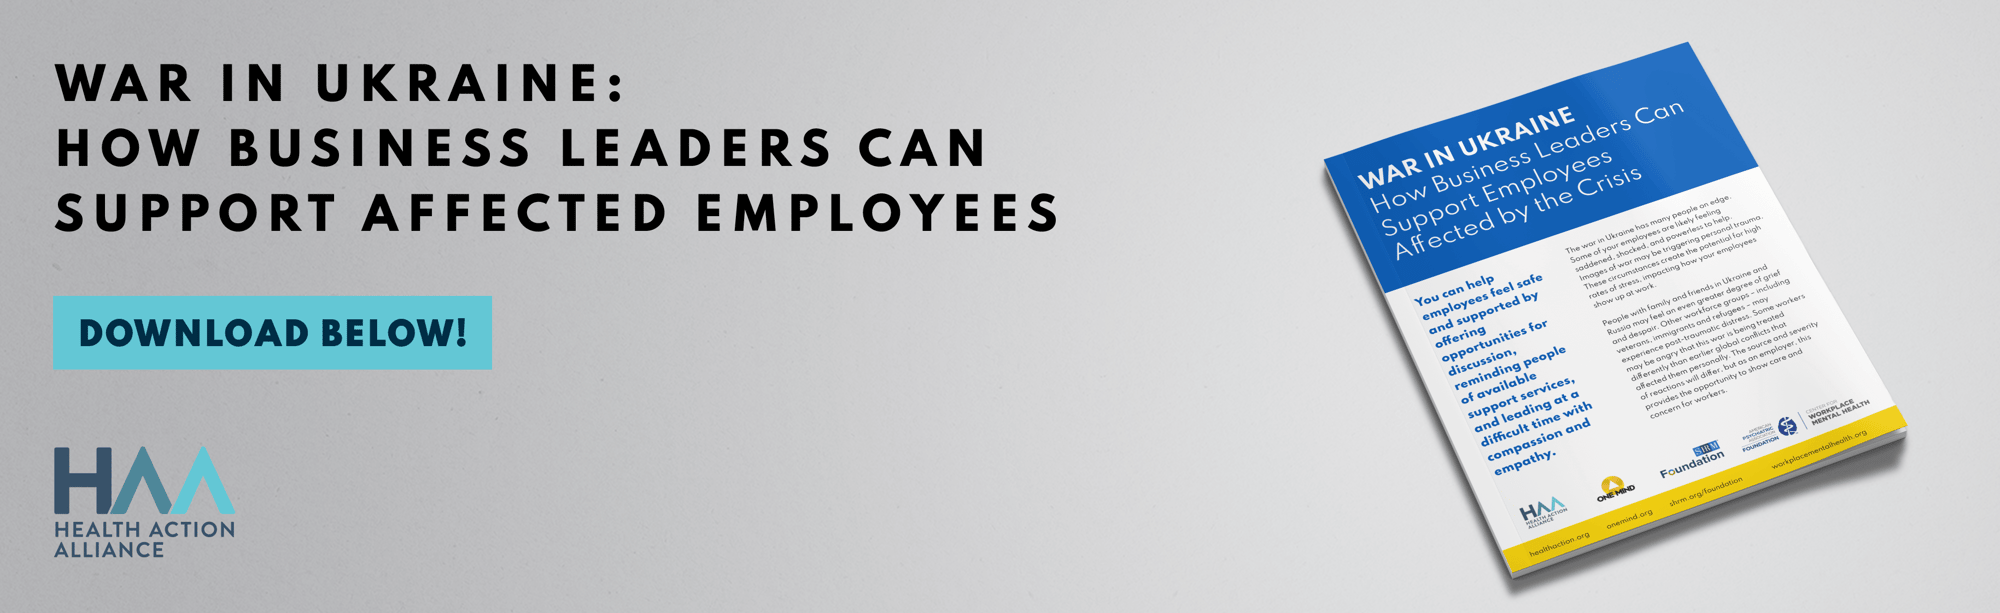 How Business Leaders Can Support Affected Employees Banner